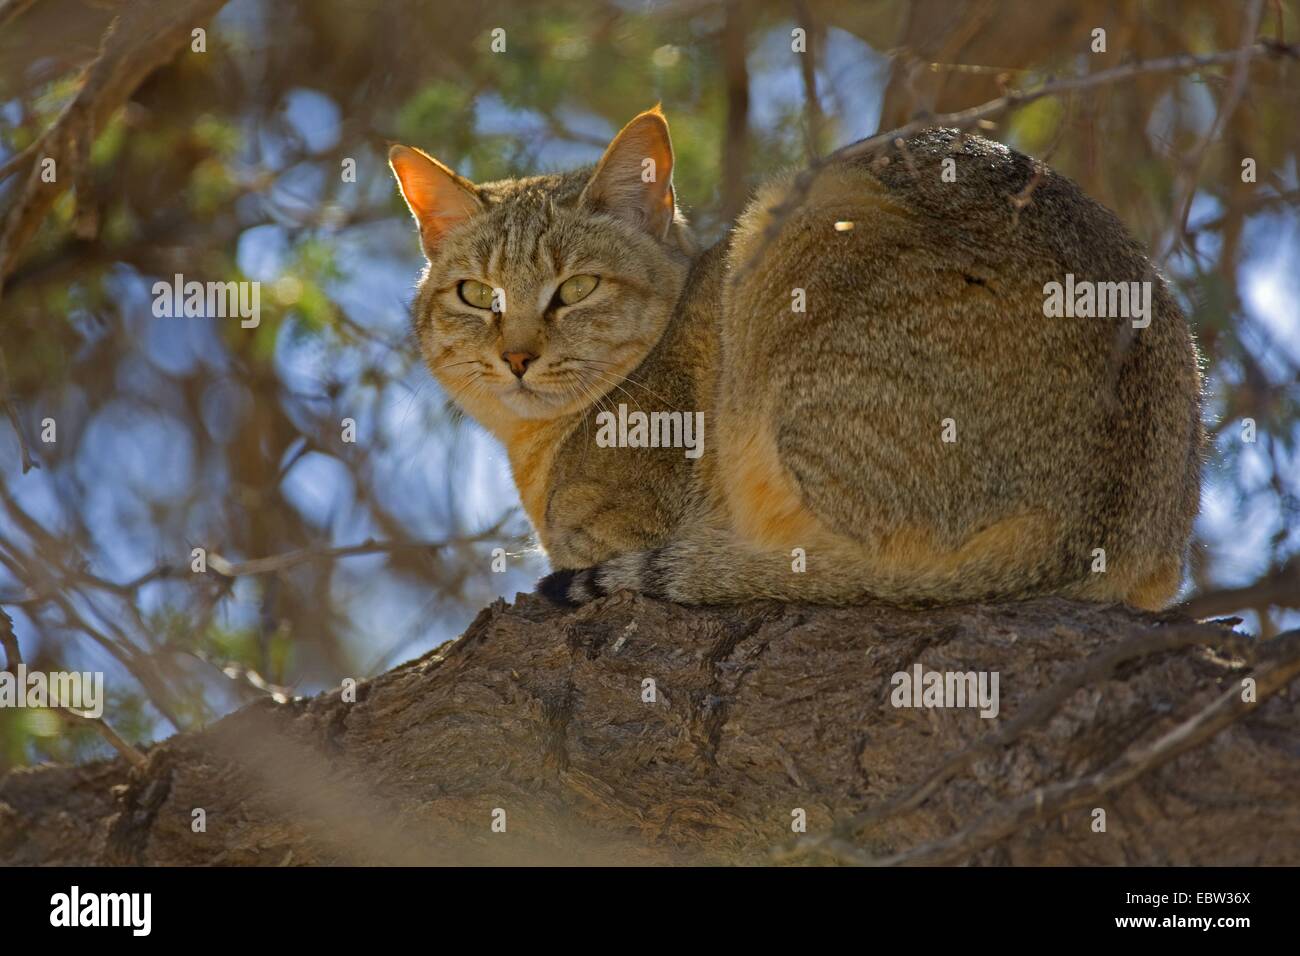 African wildcat (Felis lybica, Felis libyca, Felis silvestris lybica, Felis silvestris libyca), resting on a branch, South Africa, Northern Cape, Kgalagadi Transfrontier National Park Stock Photo